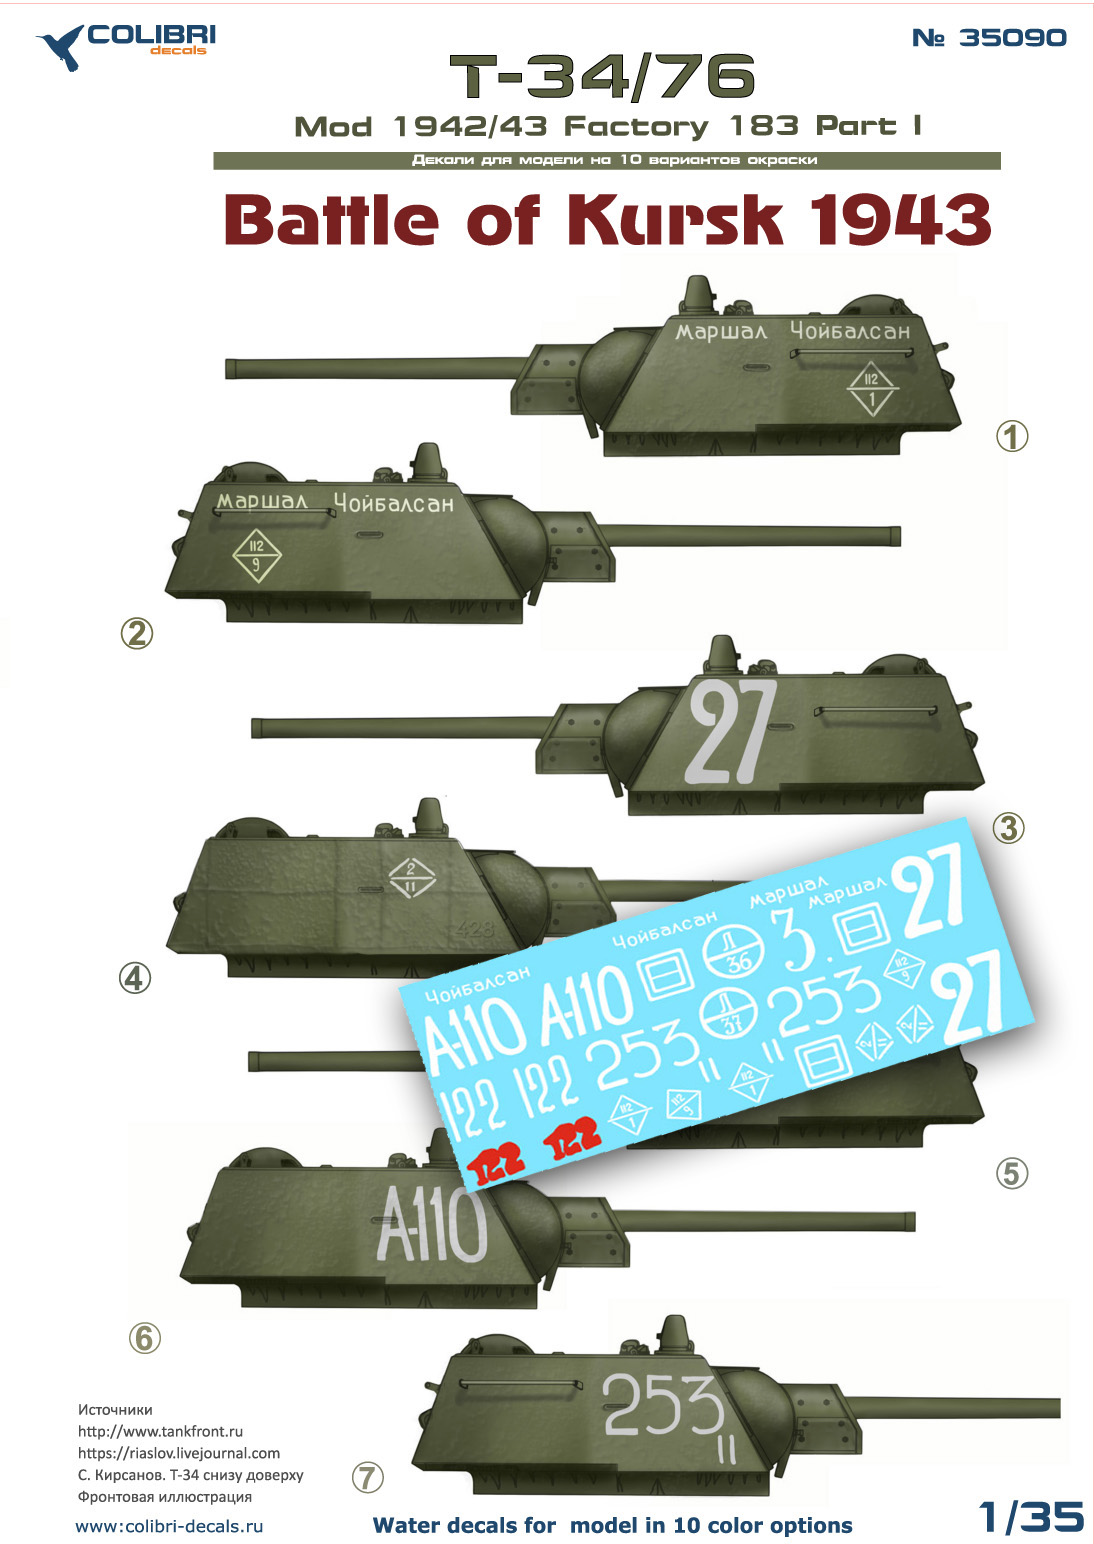 Decal 1/35 Т-34/76 мod 1942/43 Factory 183 Part I Battle of Kursk 1943 (Colibri Decals)